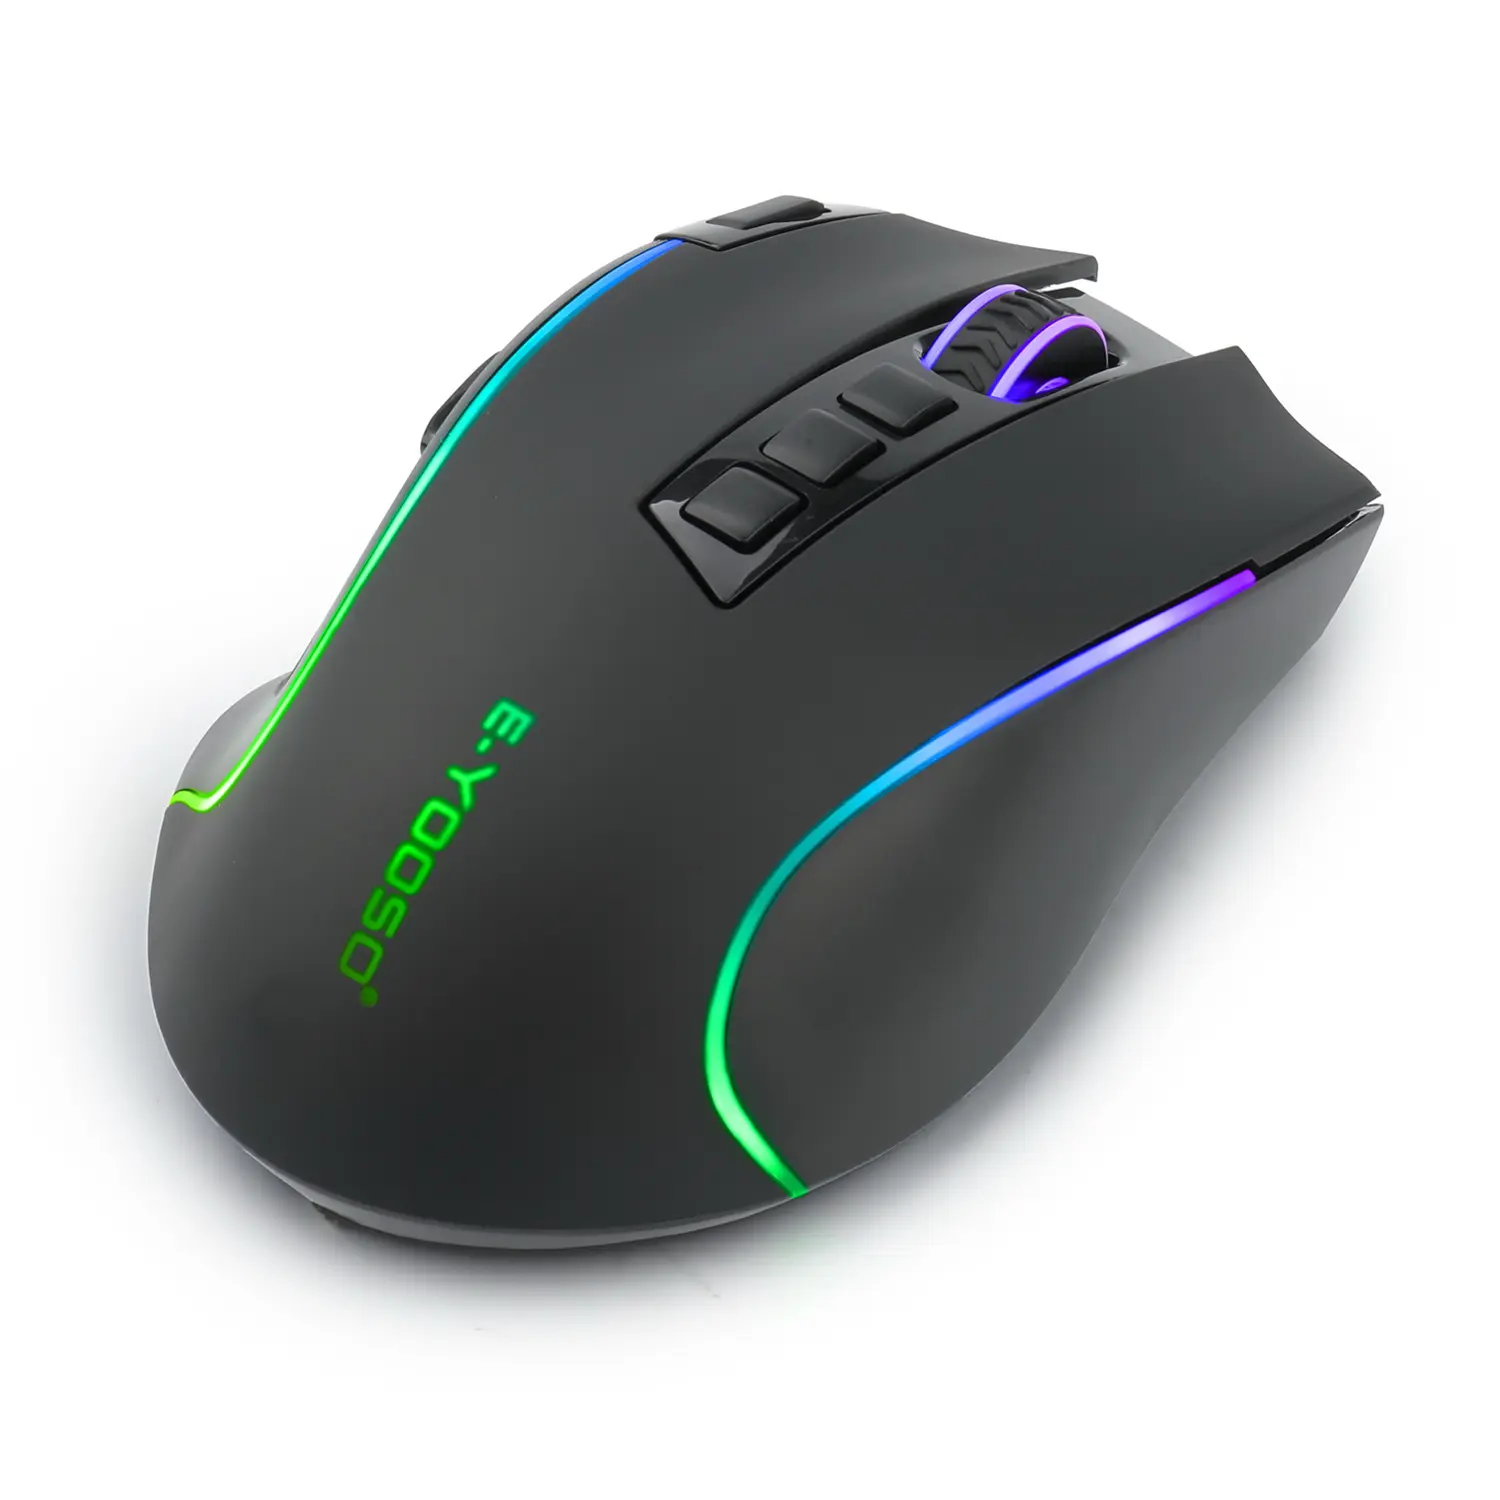 Brand Original Wired Wireless Dual mode Gaming Mouse Mice 4000 PI Optical Sensor PC Gamer Mouses